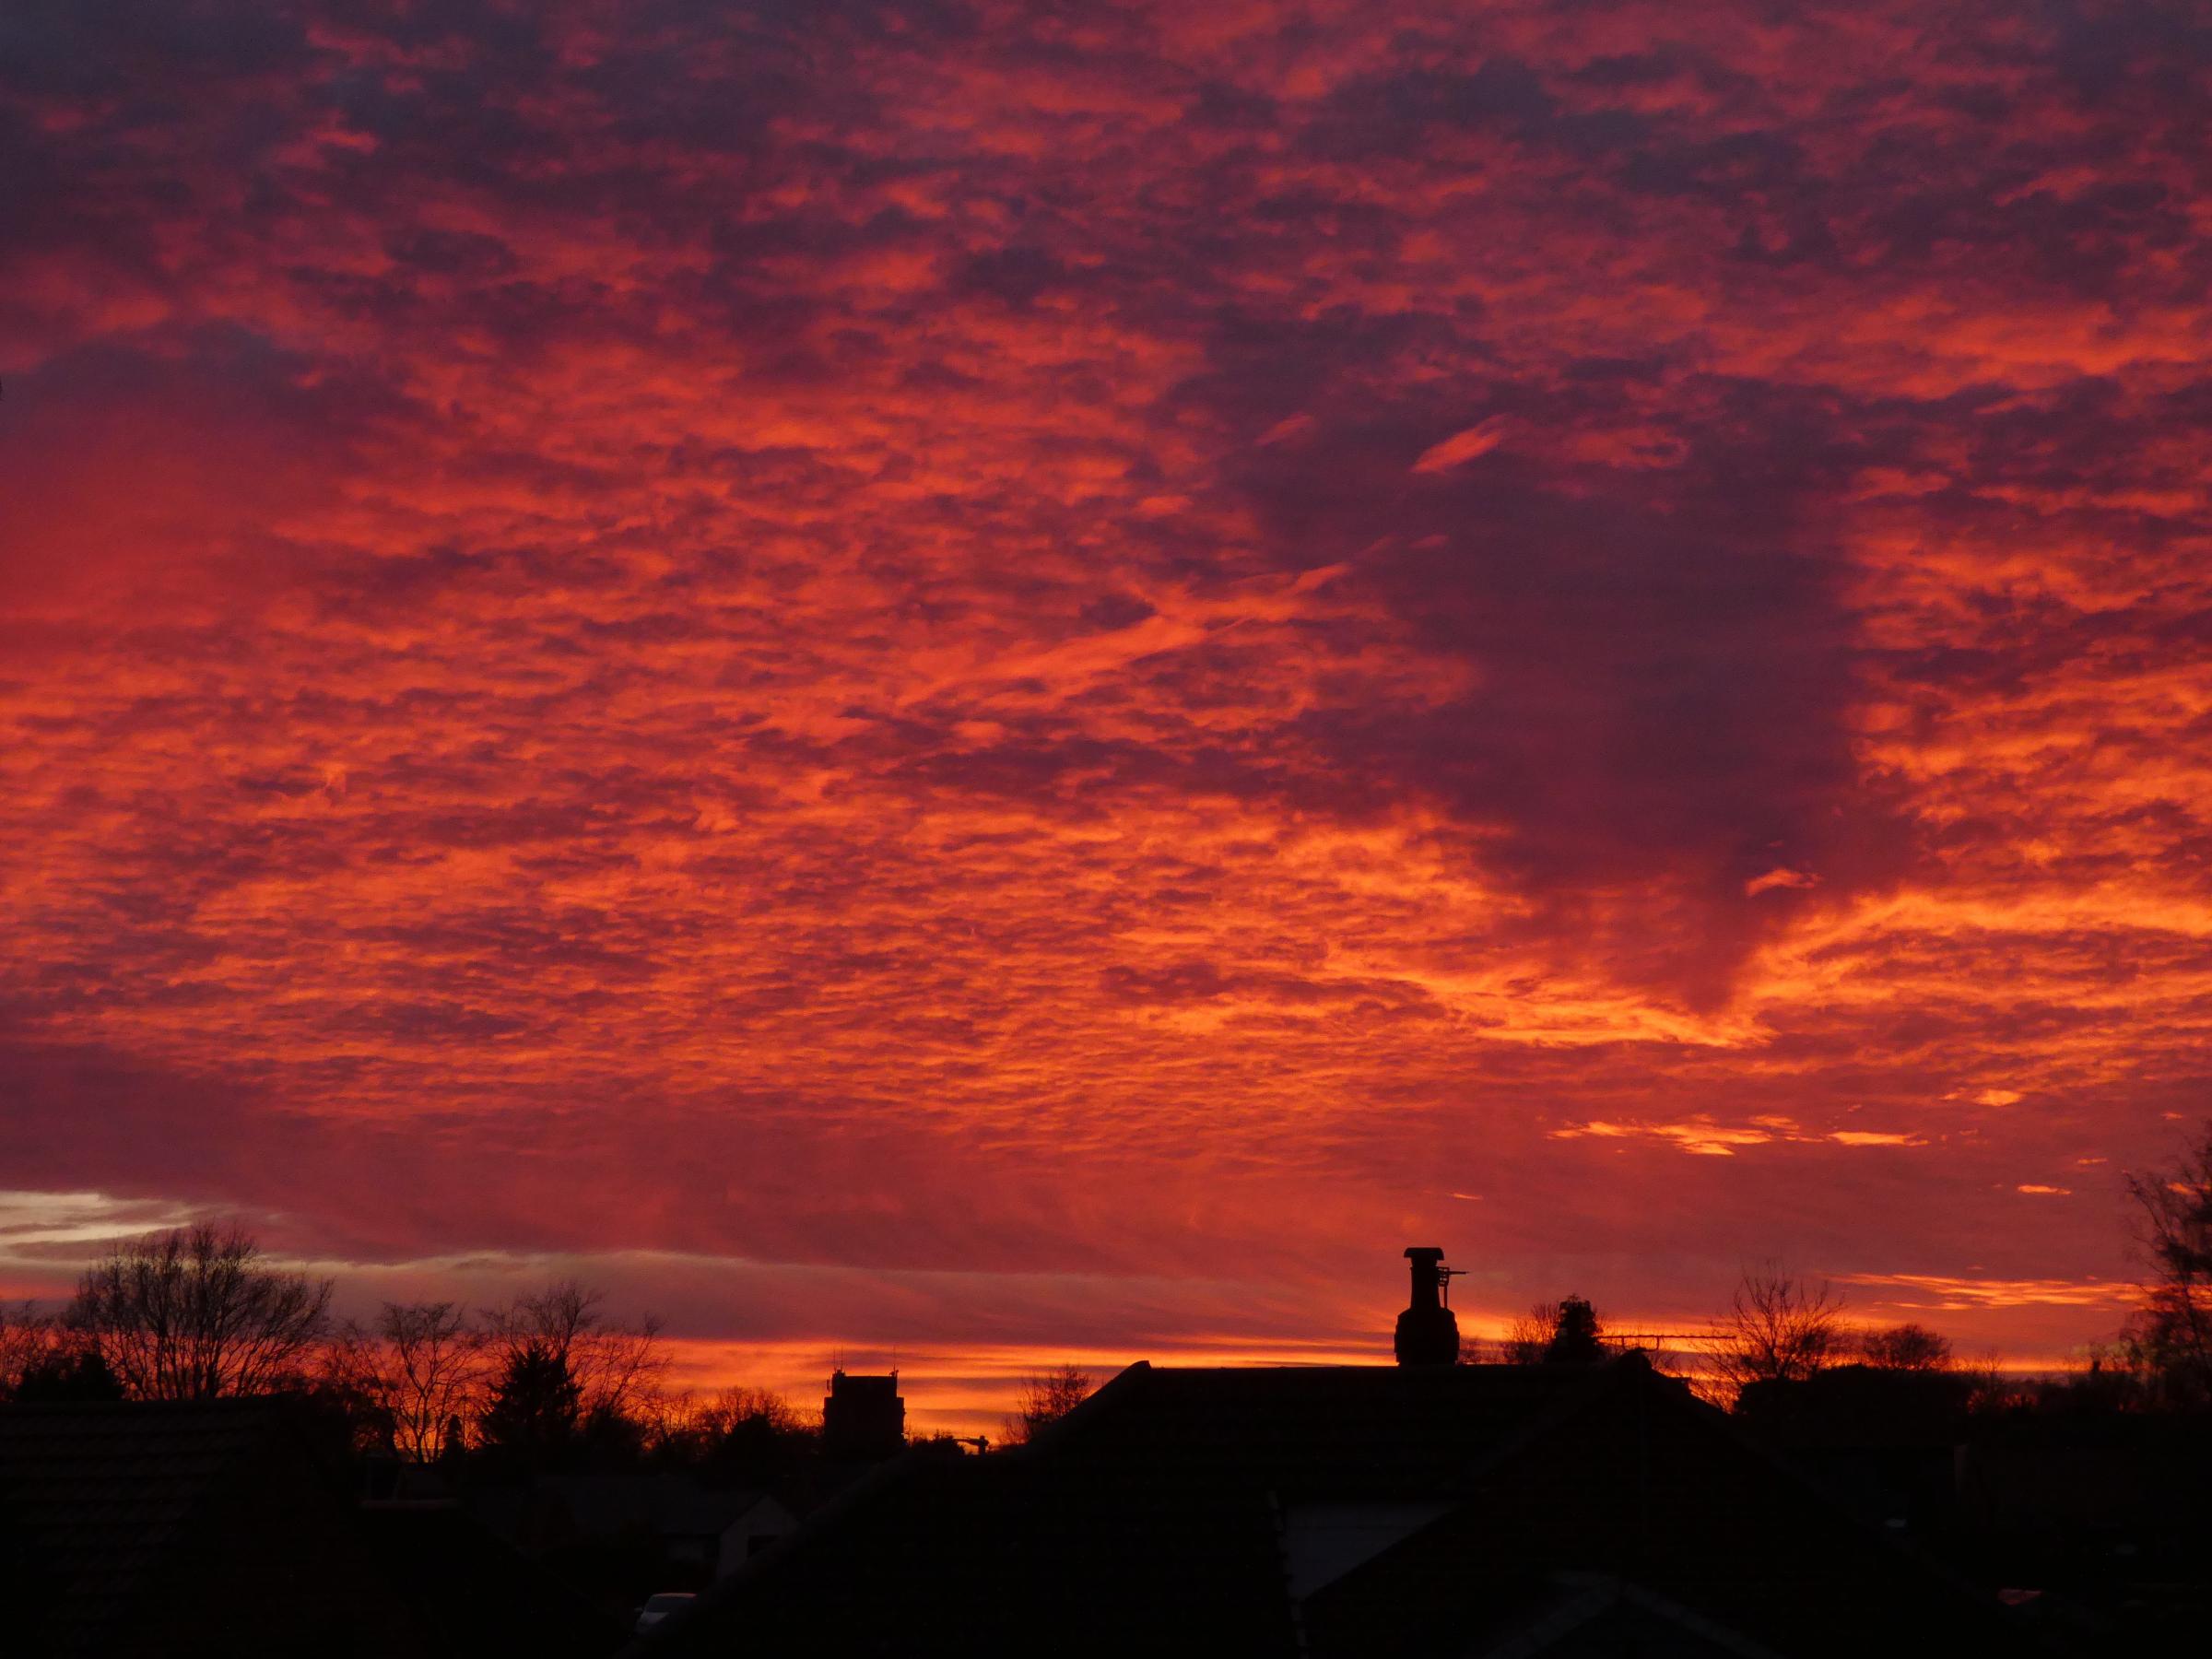 Sunset skies in Knutsford by Sophie Ralph